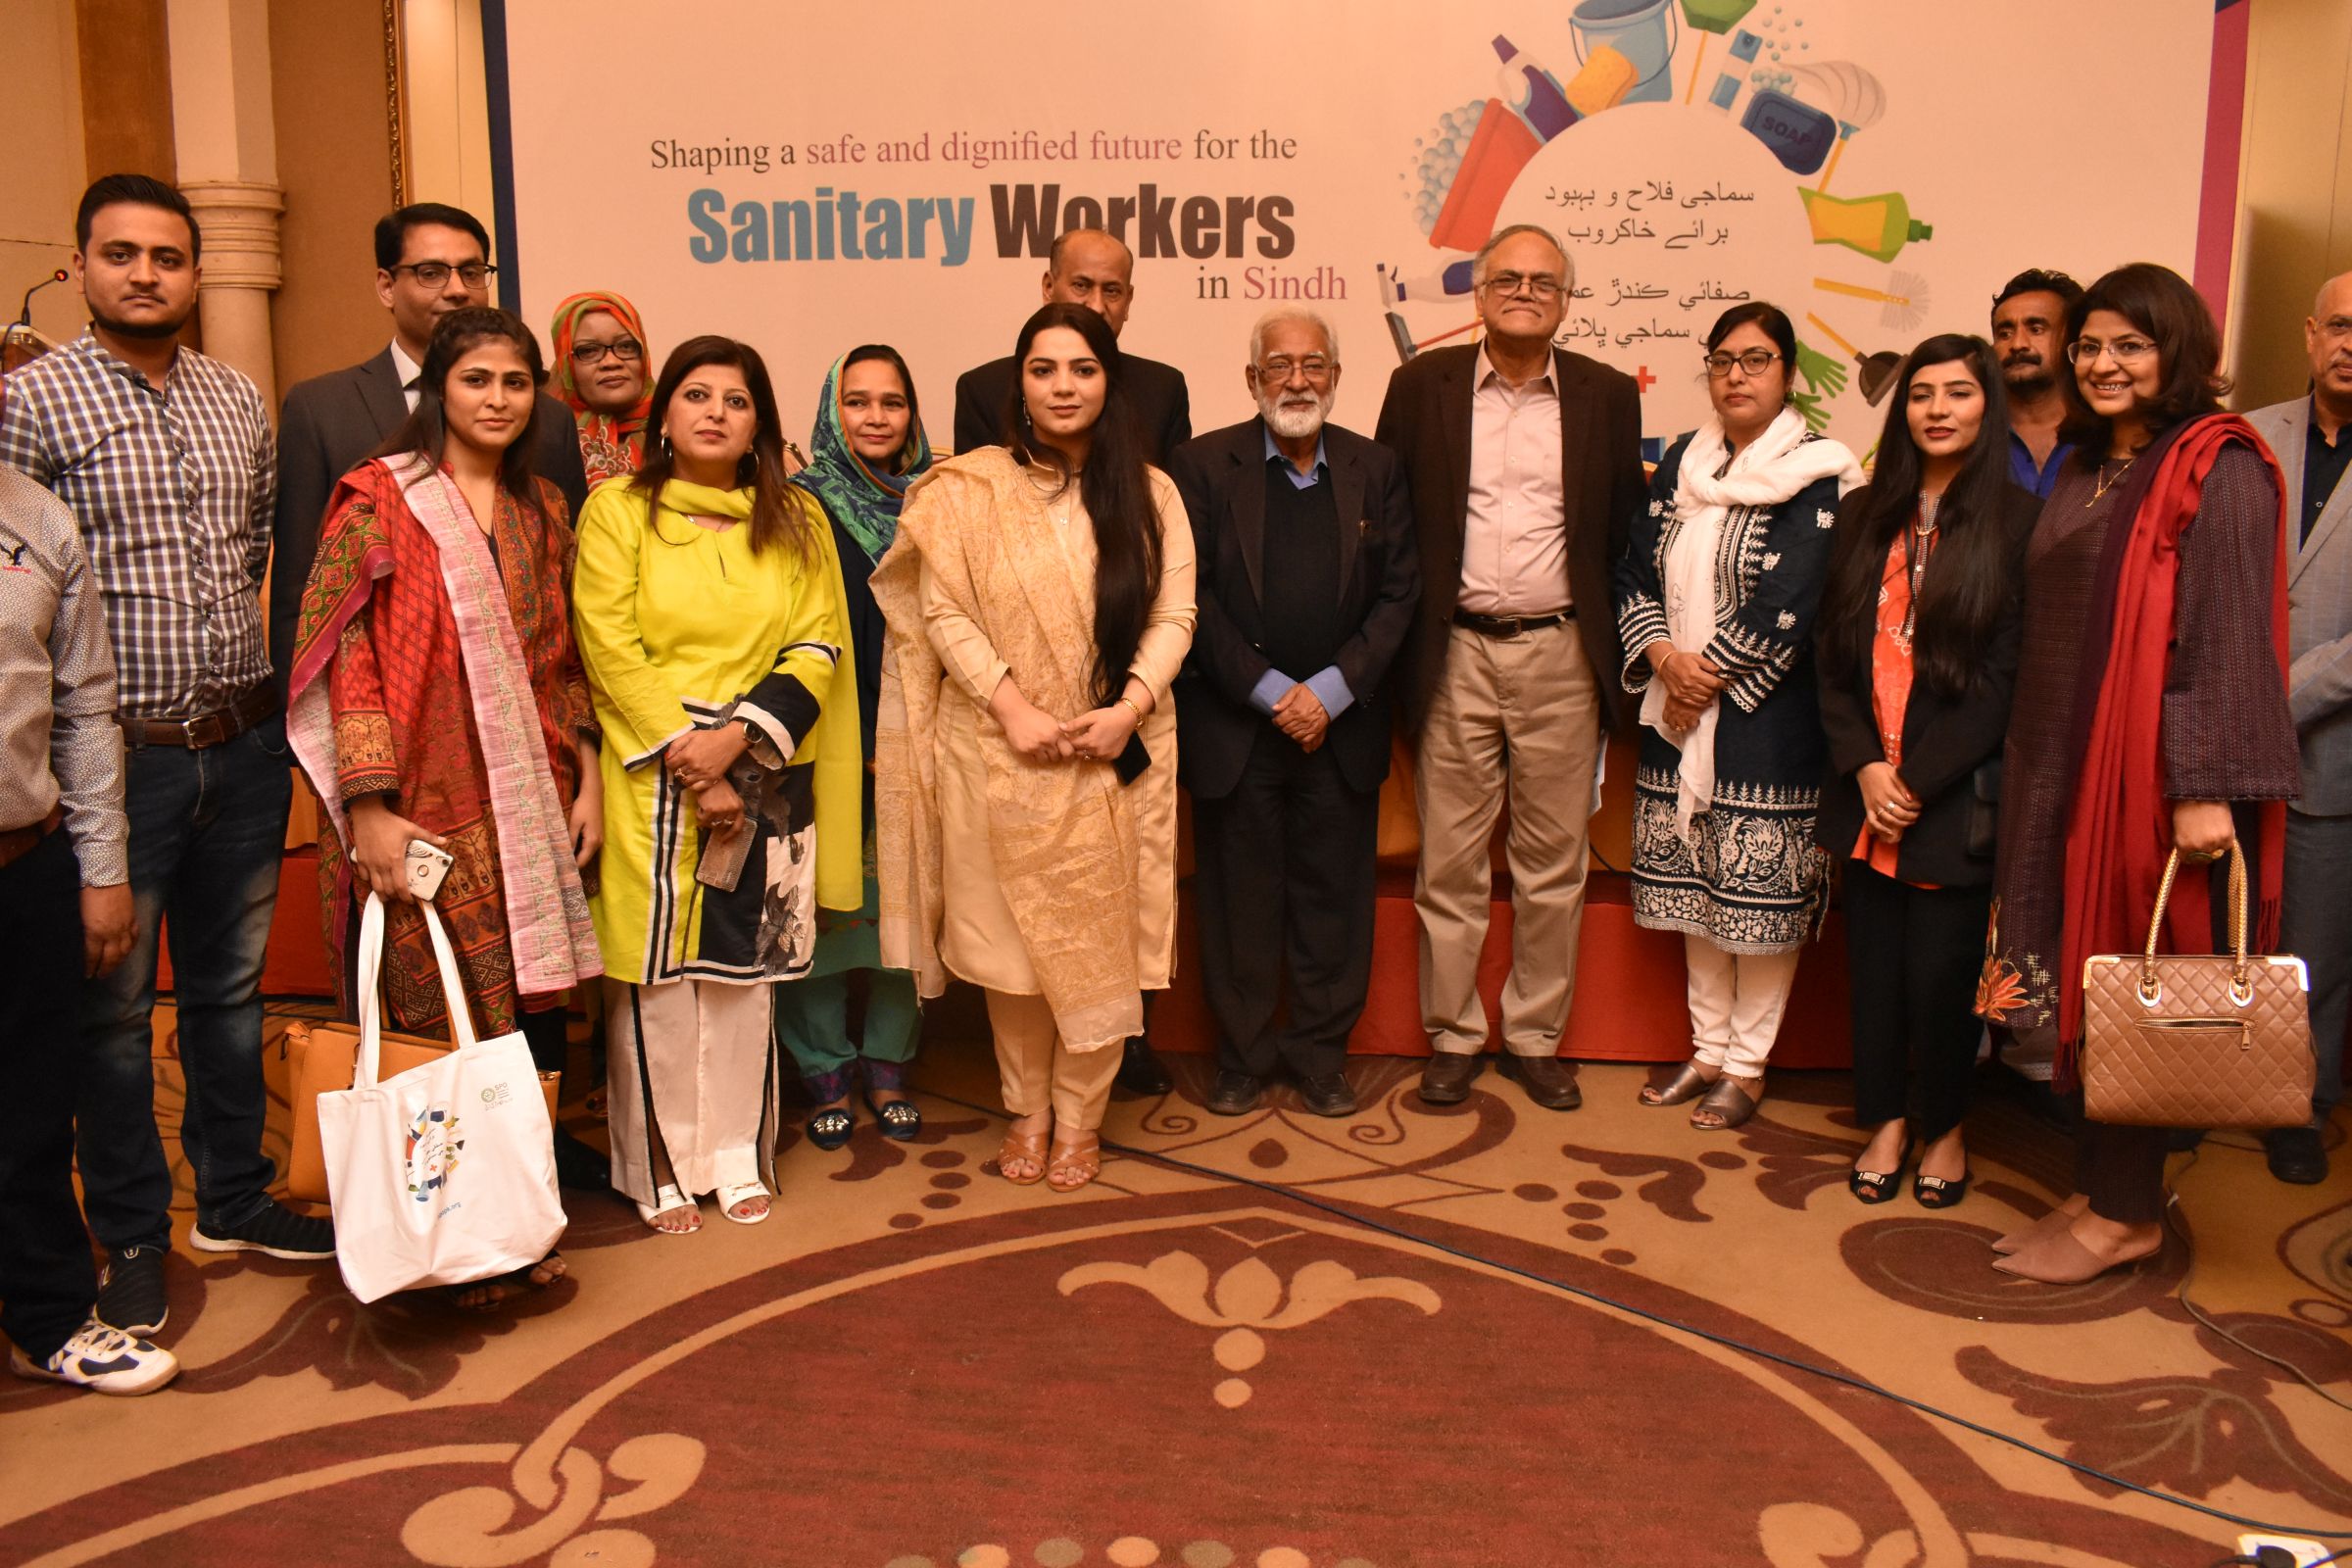 Conference on “Shaping a Safe and Dignified Future for the Sanitary Workers in Sindh”